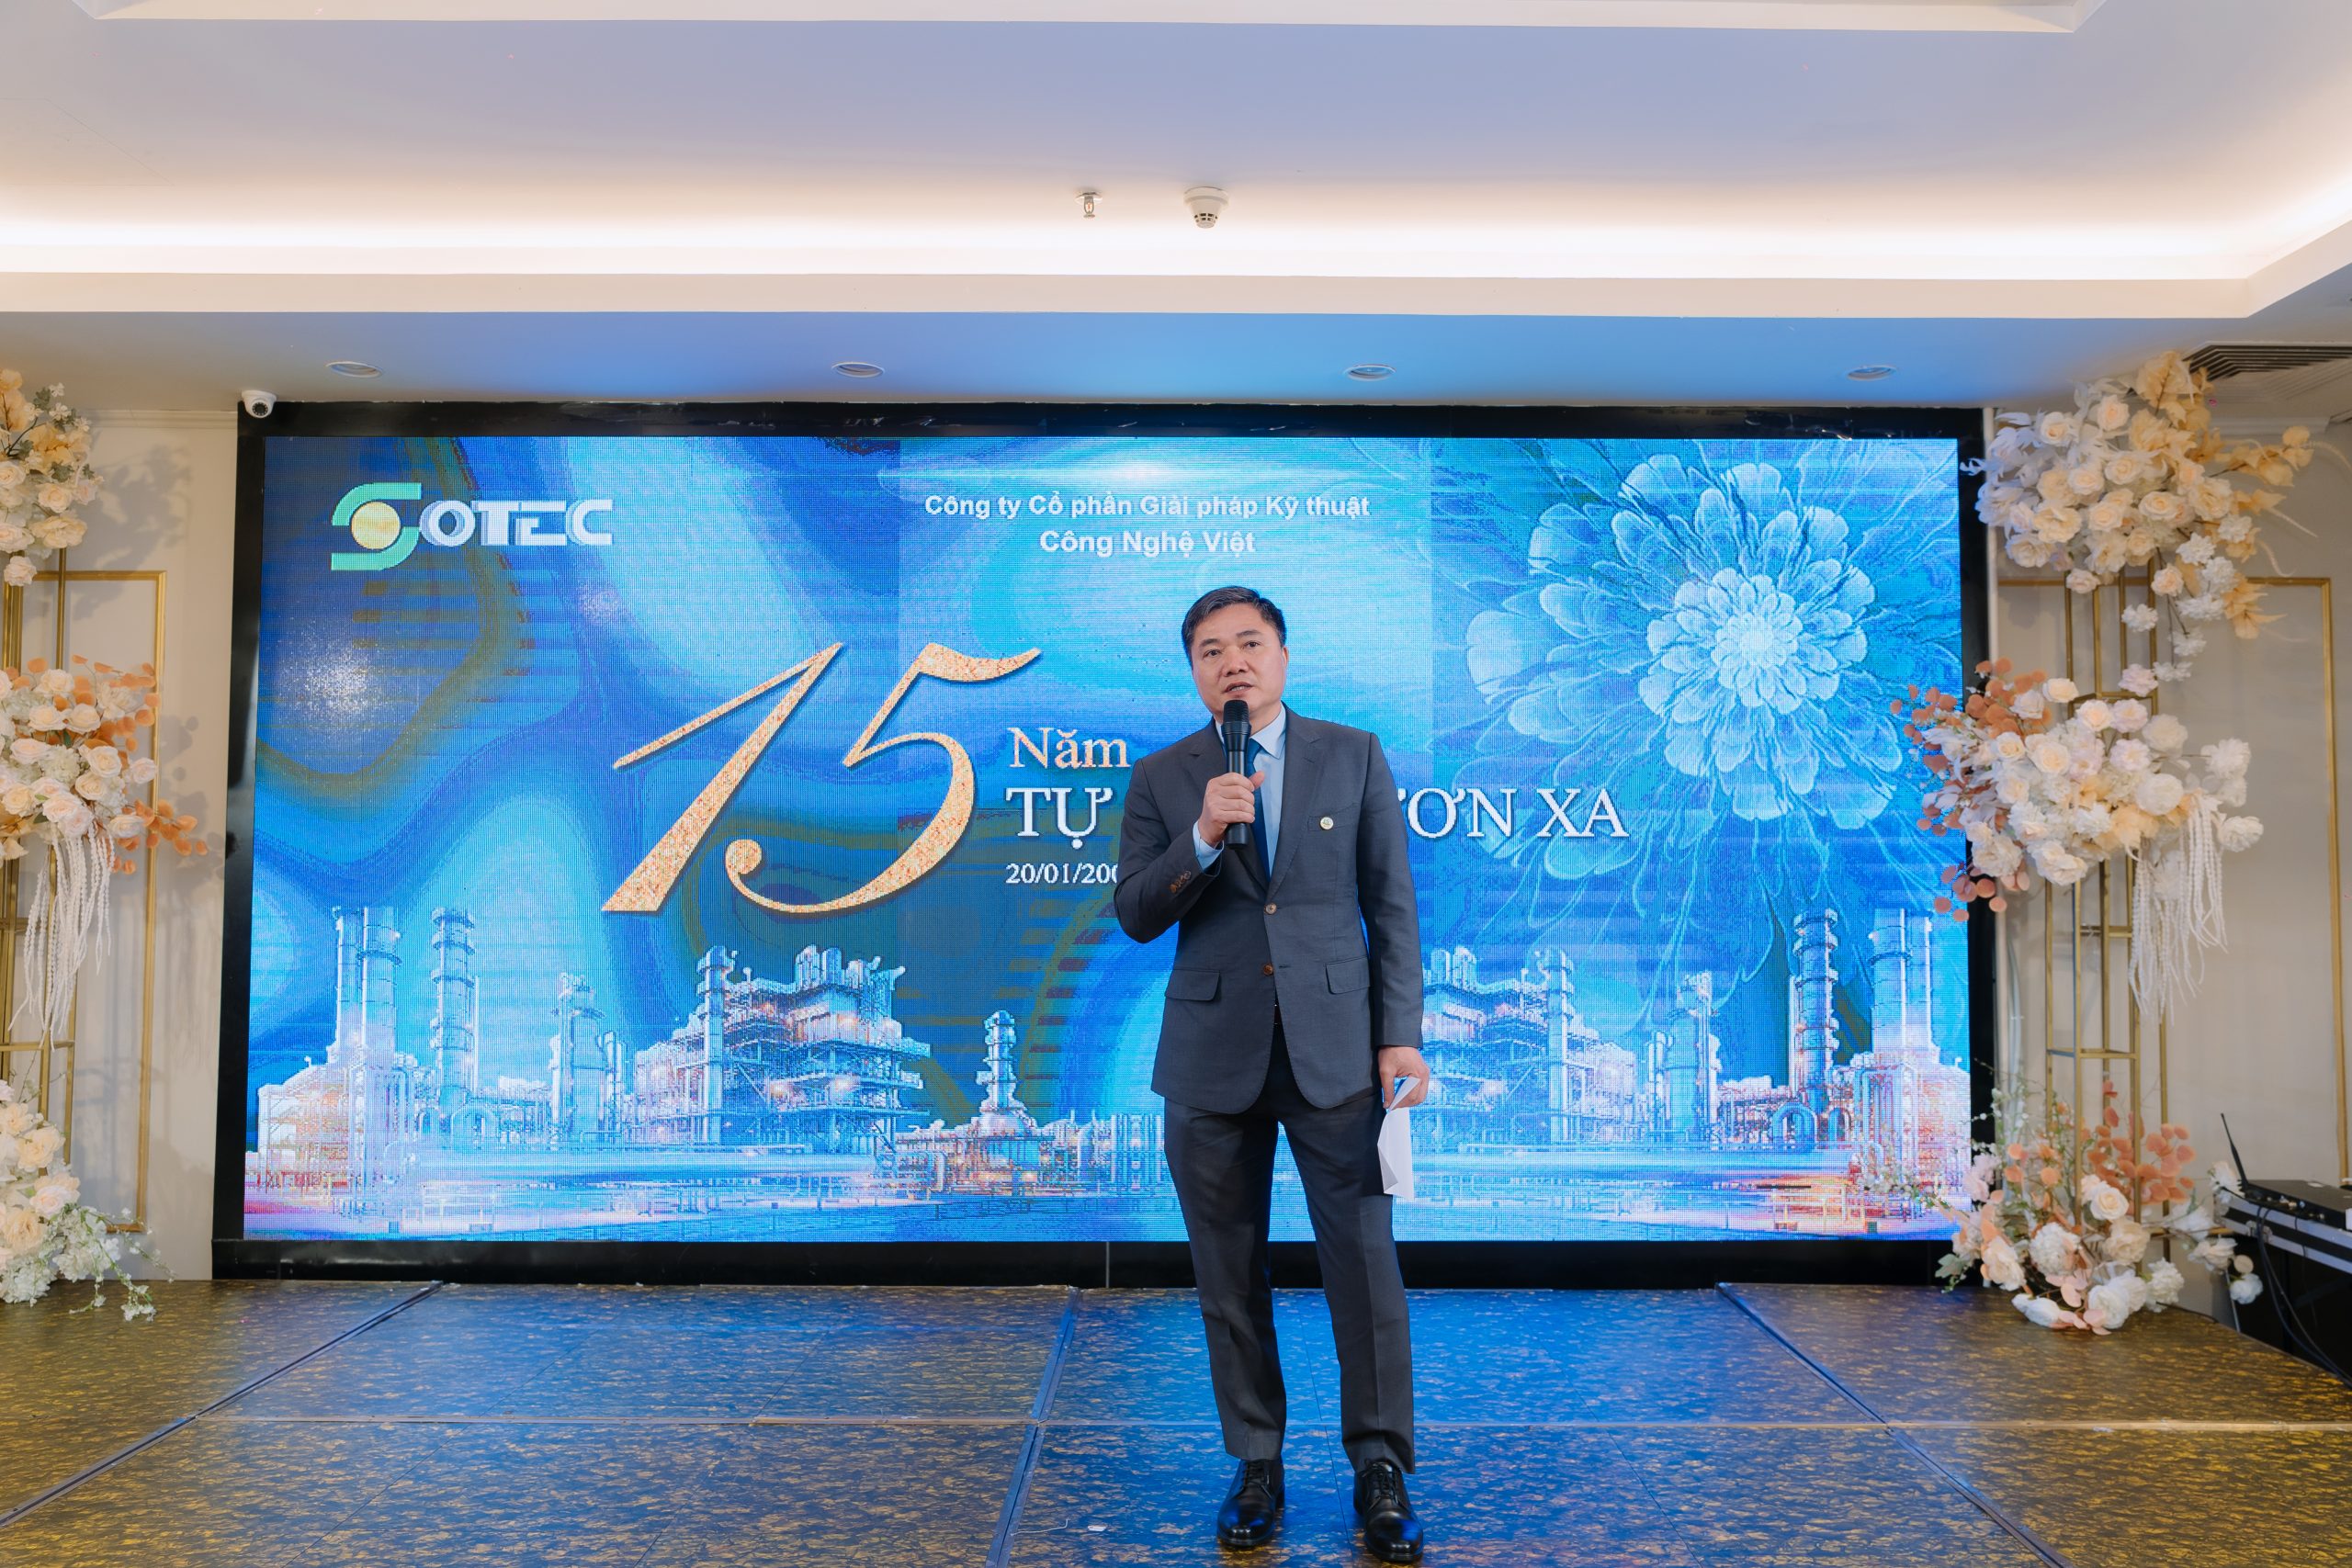 Chairman of the Board of Directors Nguyen Van Toai spoke at the opening ceremony